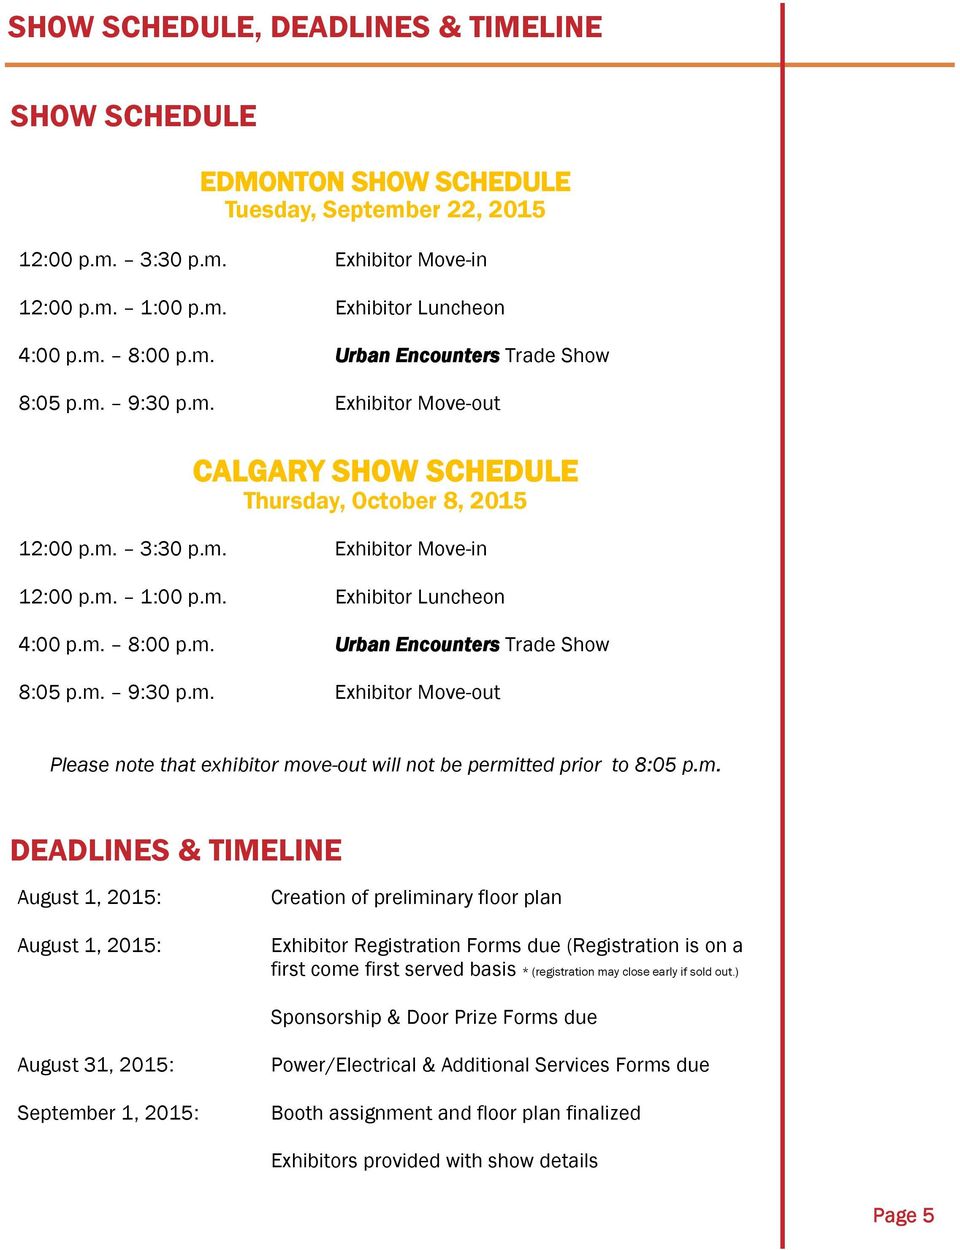 m. 9:30 p.m. Exhibitor Move-out Please note that exhibitor move-out will not be permitted prior to 8:05 p.m. DEADLINES & TIMELINE August 1, 2015: August 1, 2015: Creation of preliminary floor plan